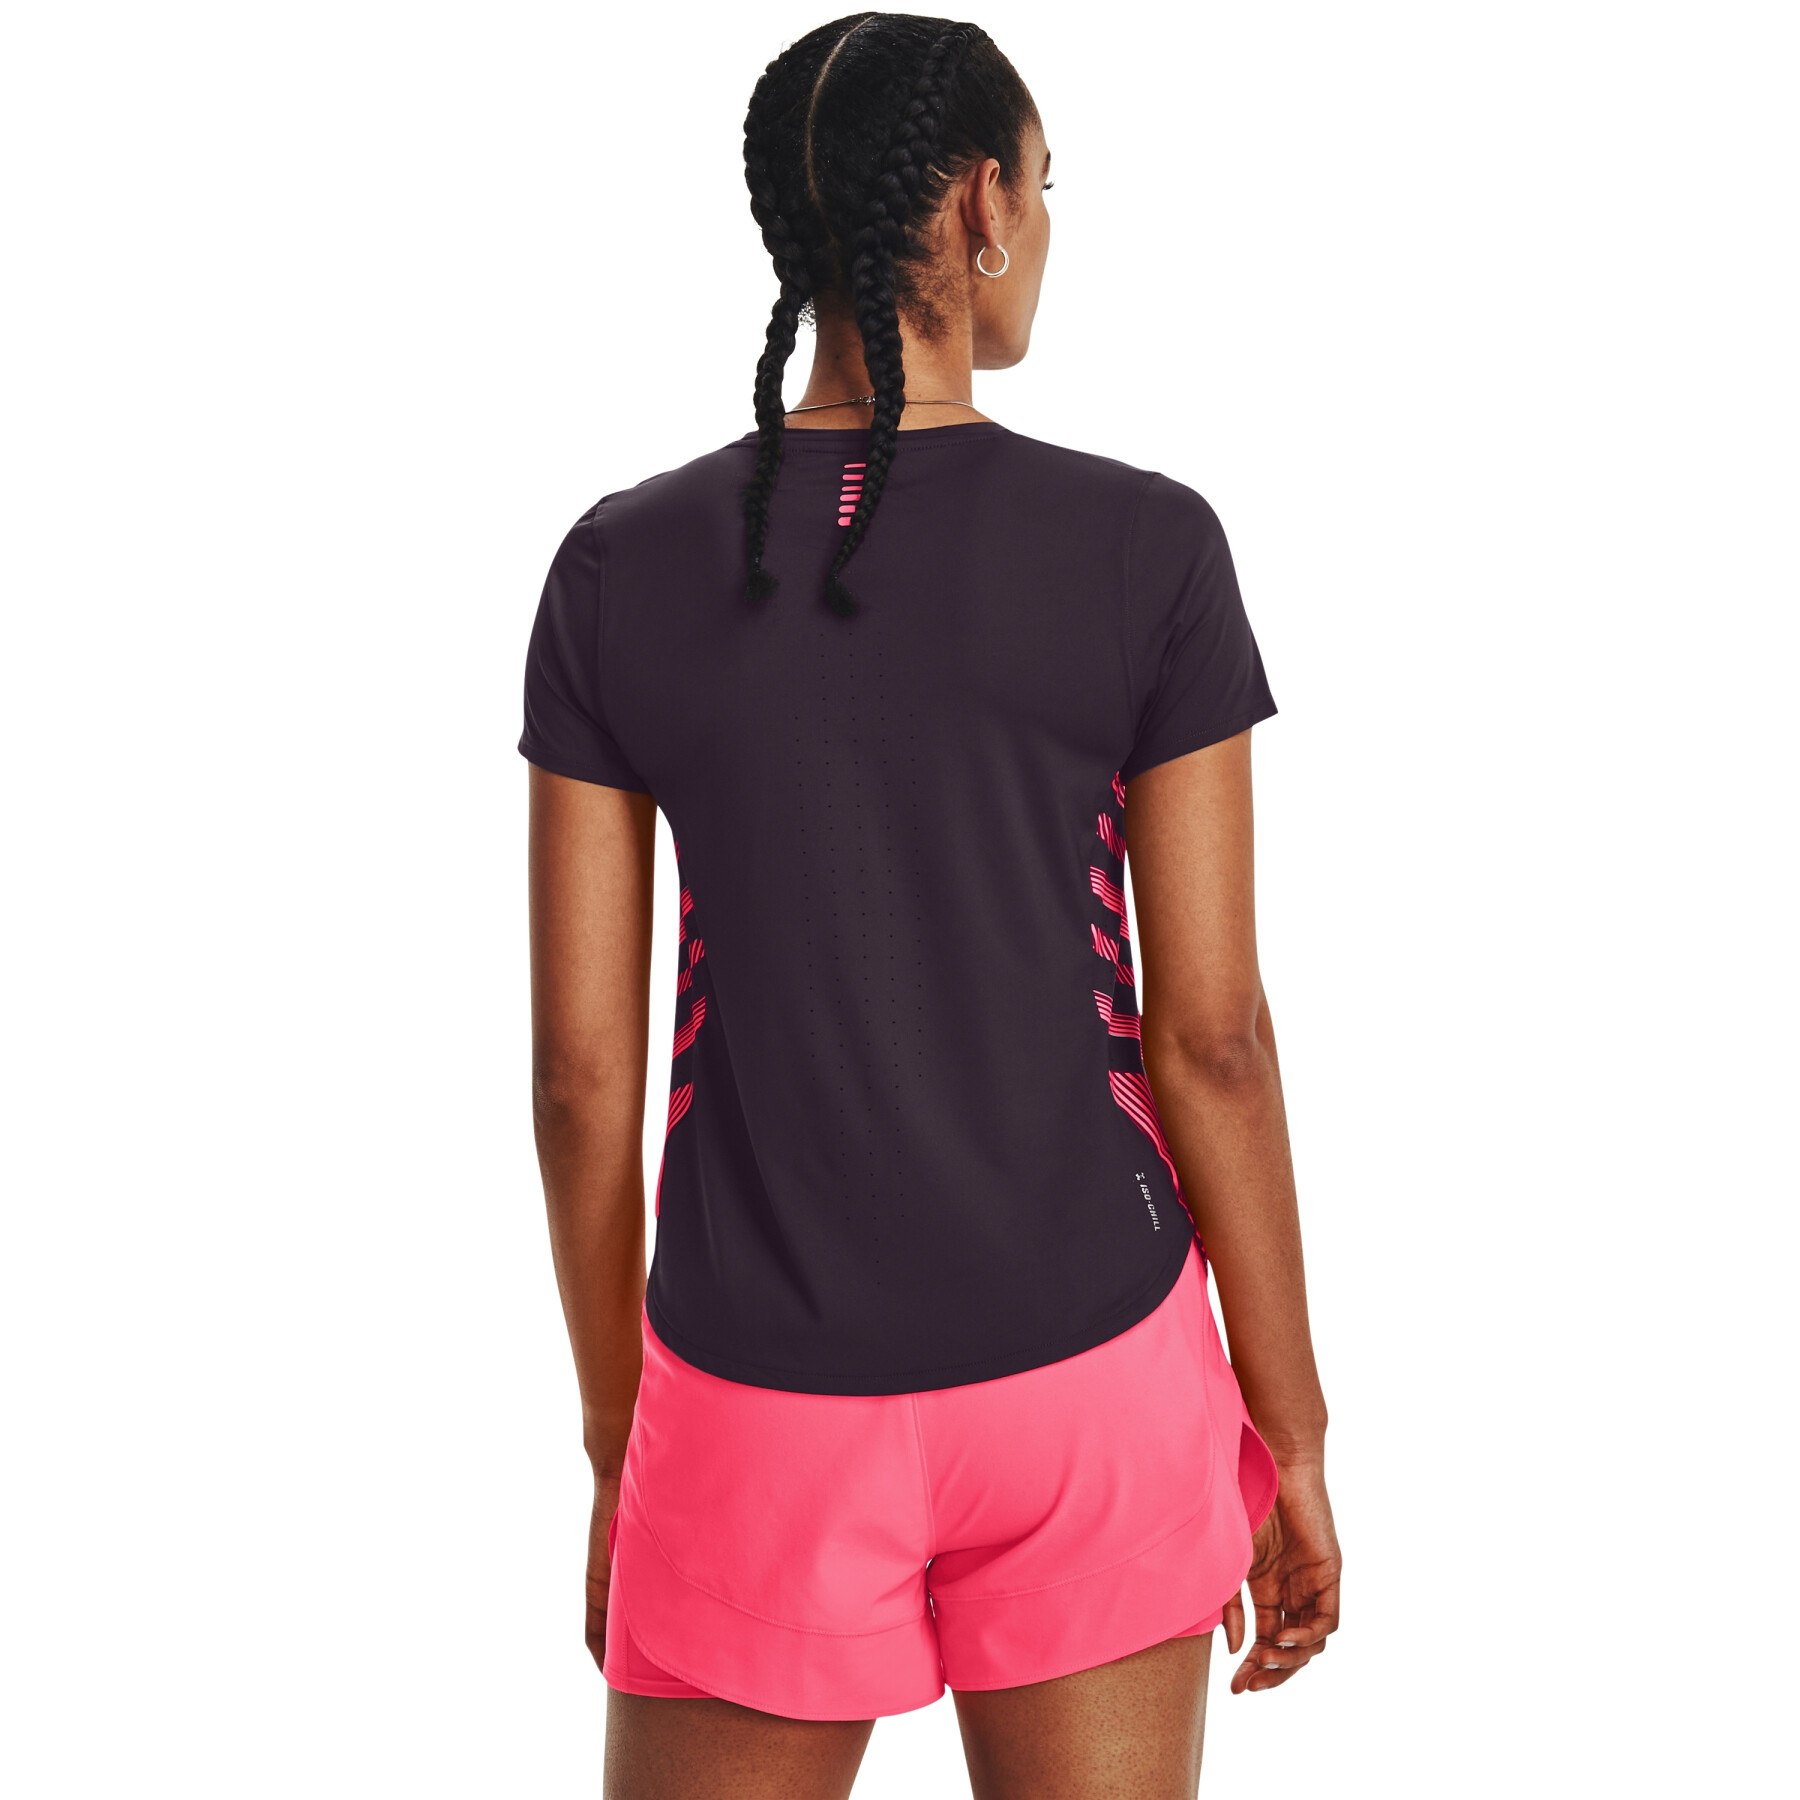 Camiseta de mujer Under Armour Iso-Chill Laser II